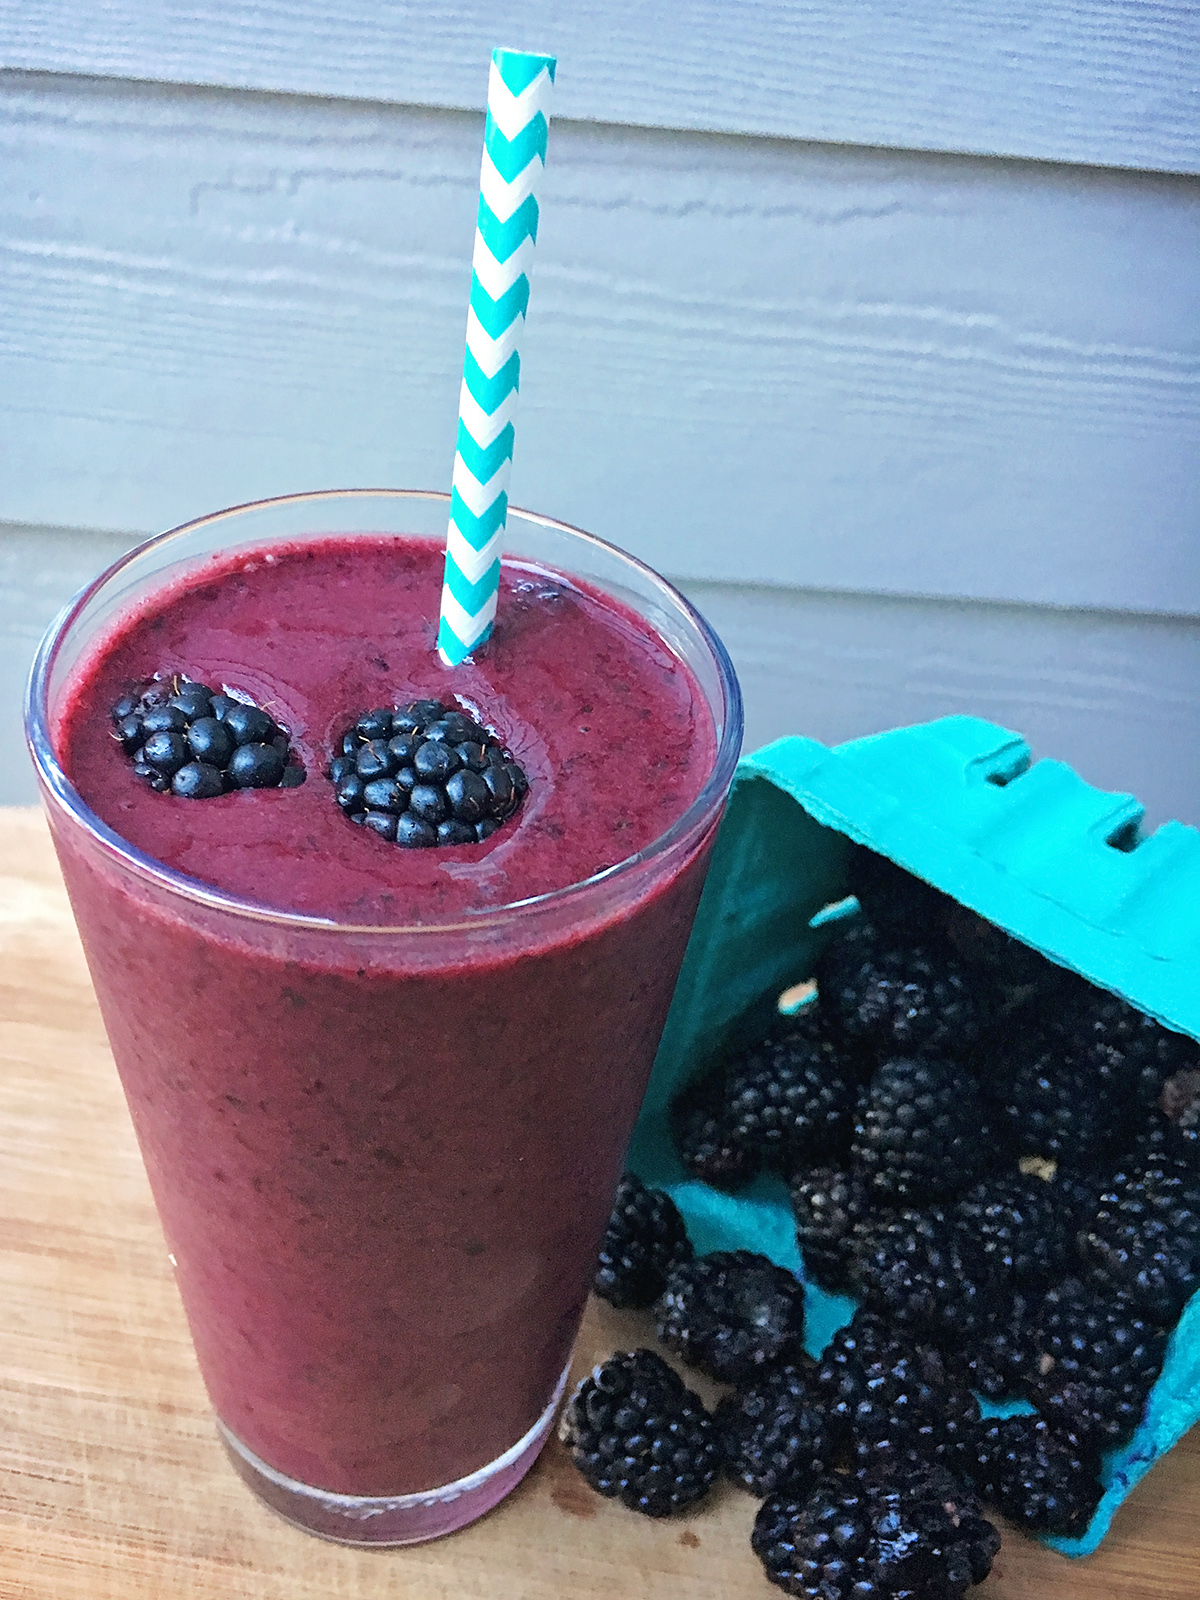 Triple Berry and Miso Smoothie | A Well Crafted Party